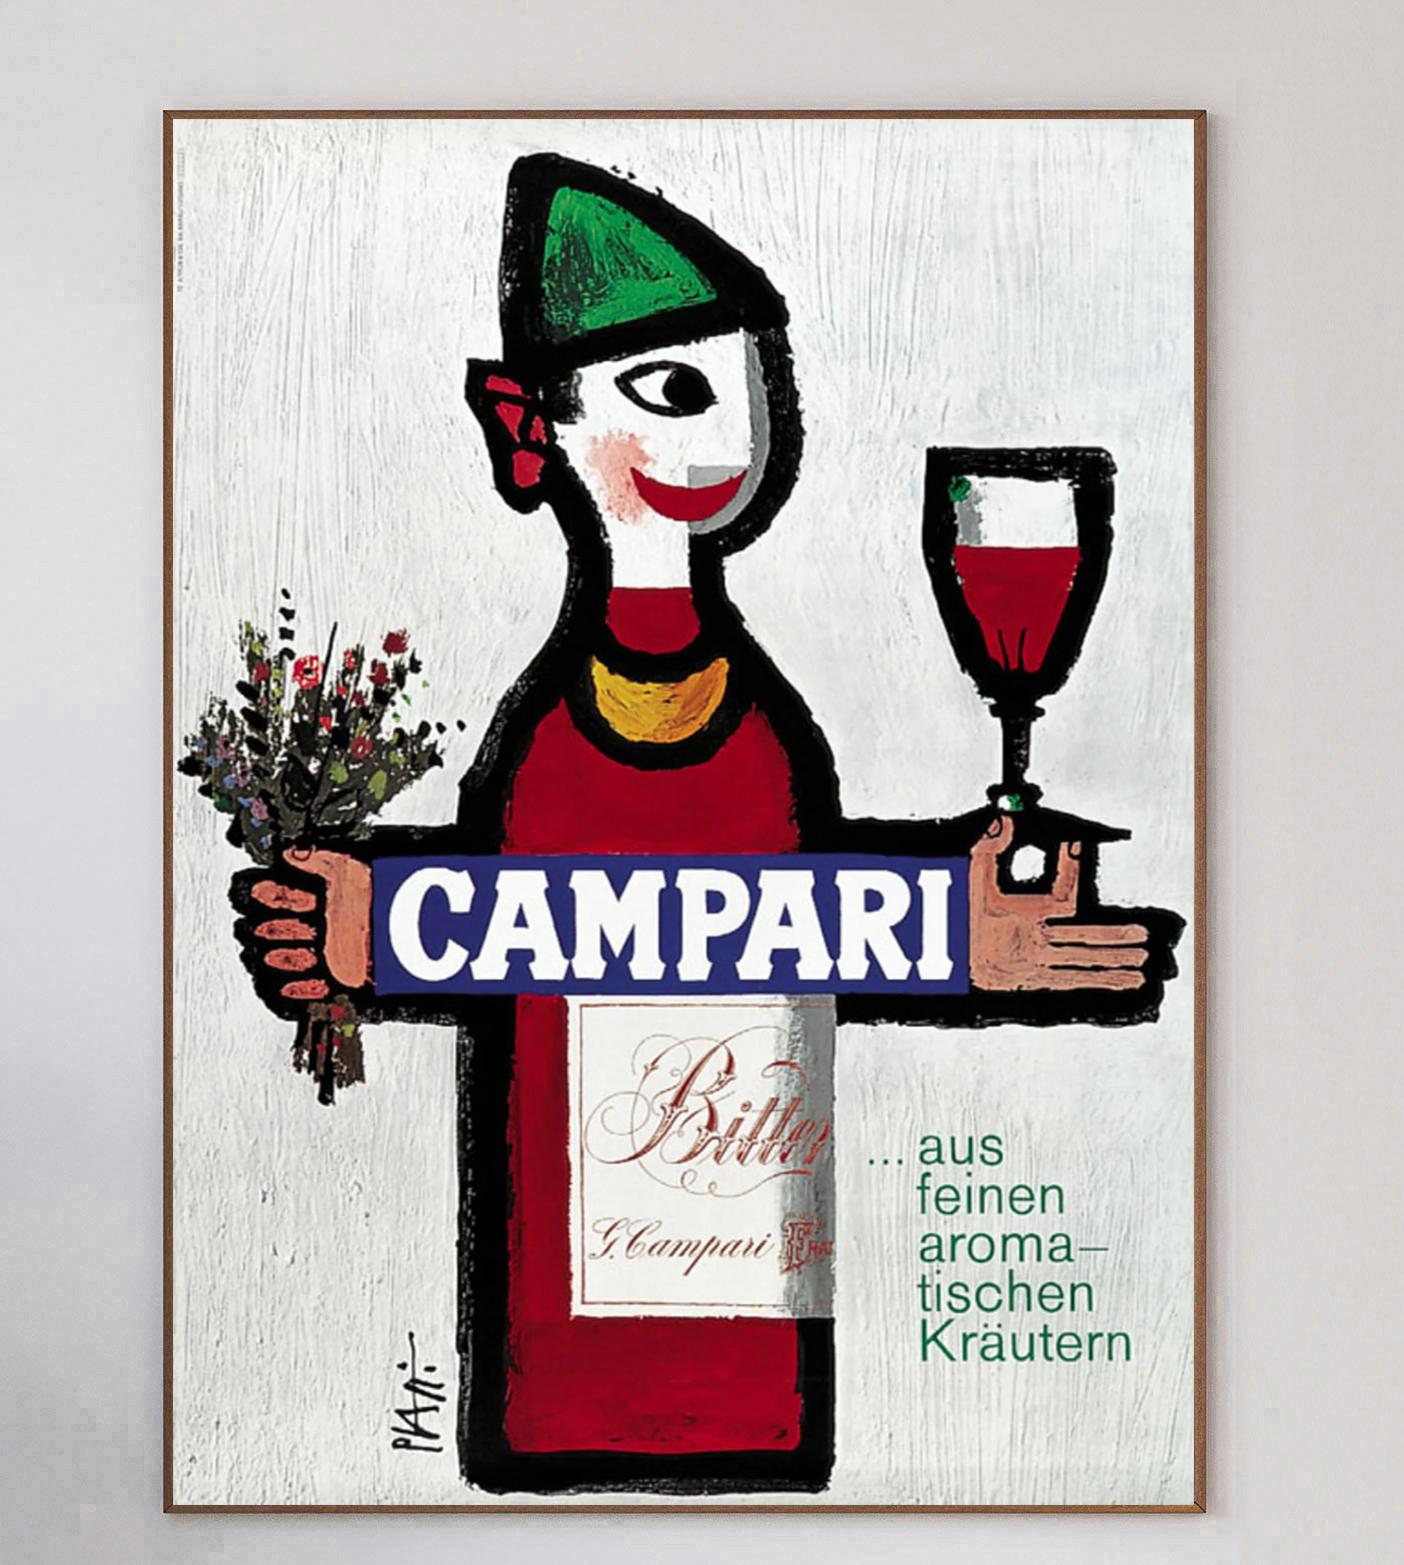 Iconic Italian liqueur brand Campari collaborated with many artists throughout the 20th century, creating wonderful and timeless artworks. Campari was formed in 1860 by Gaspare Campari and the aperitif is as popular today as ever. His son, Davide